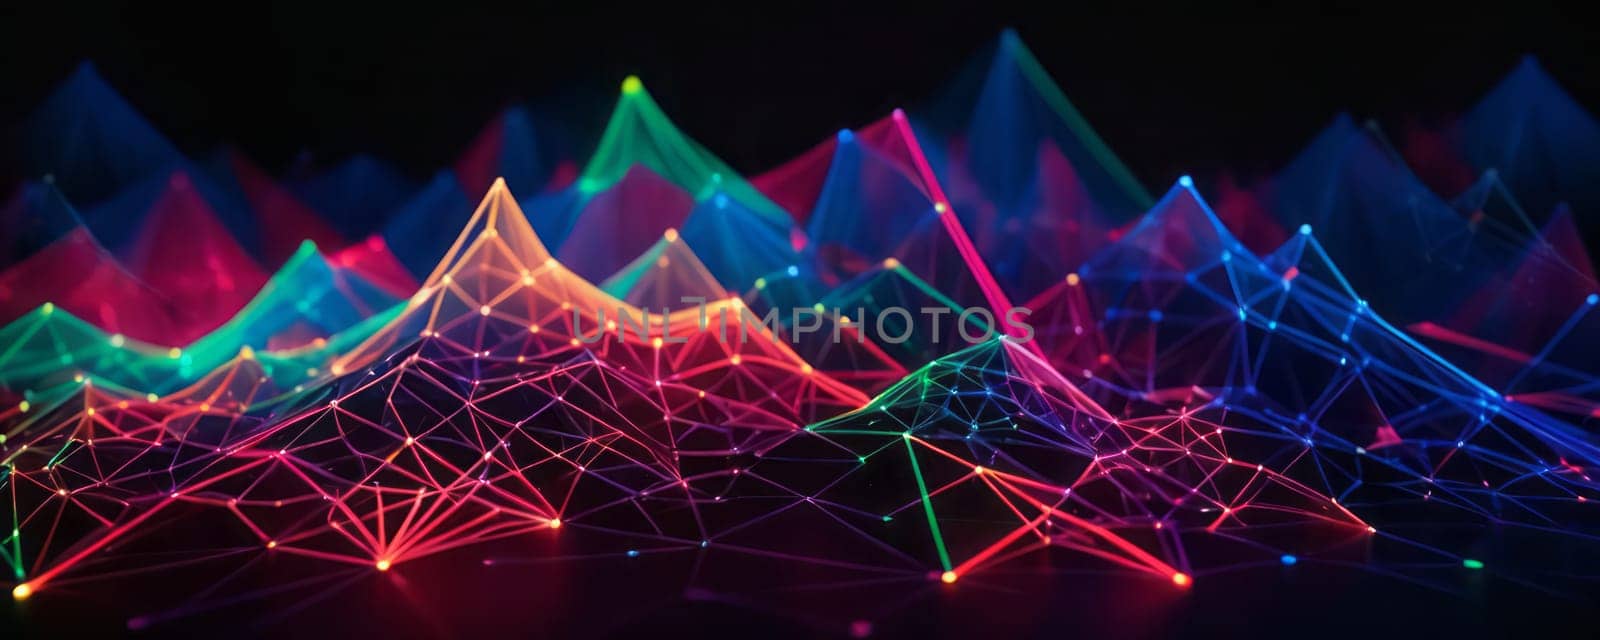 The image showcases a vibrant digital landscape made up of interconnected lines and dots, forming geometric shapes. The colors transition smoothly from green, yellow, red to purple, creating a visually appealing gradient effect. The image conveys a sense of futuristic technology and dynamic connectivity. Generative AI